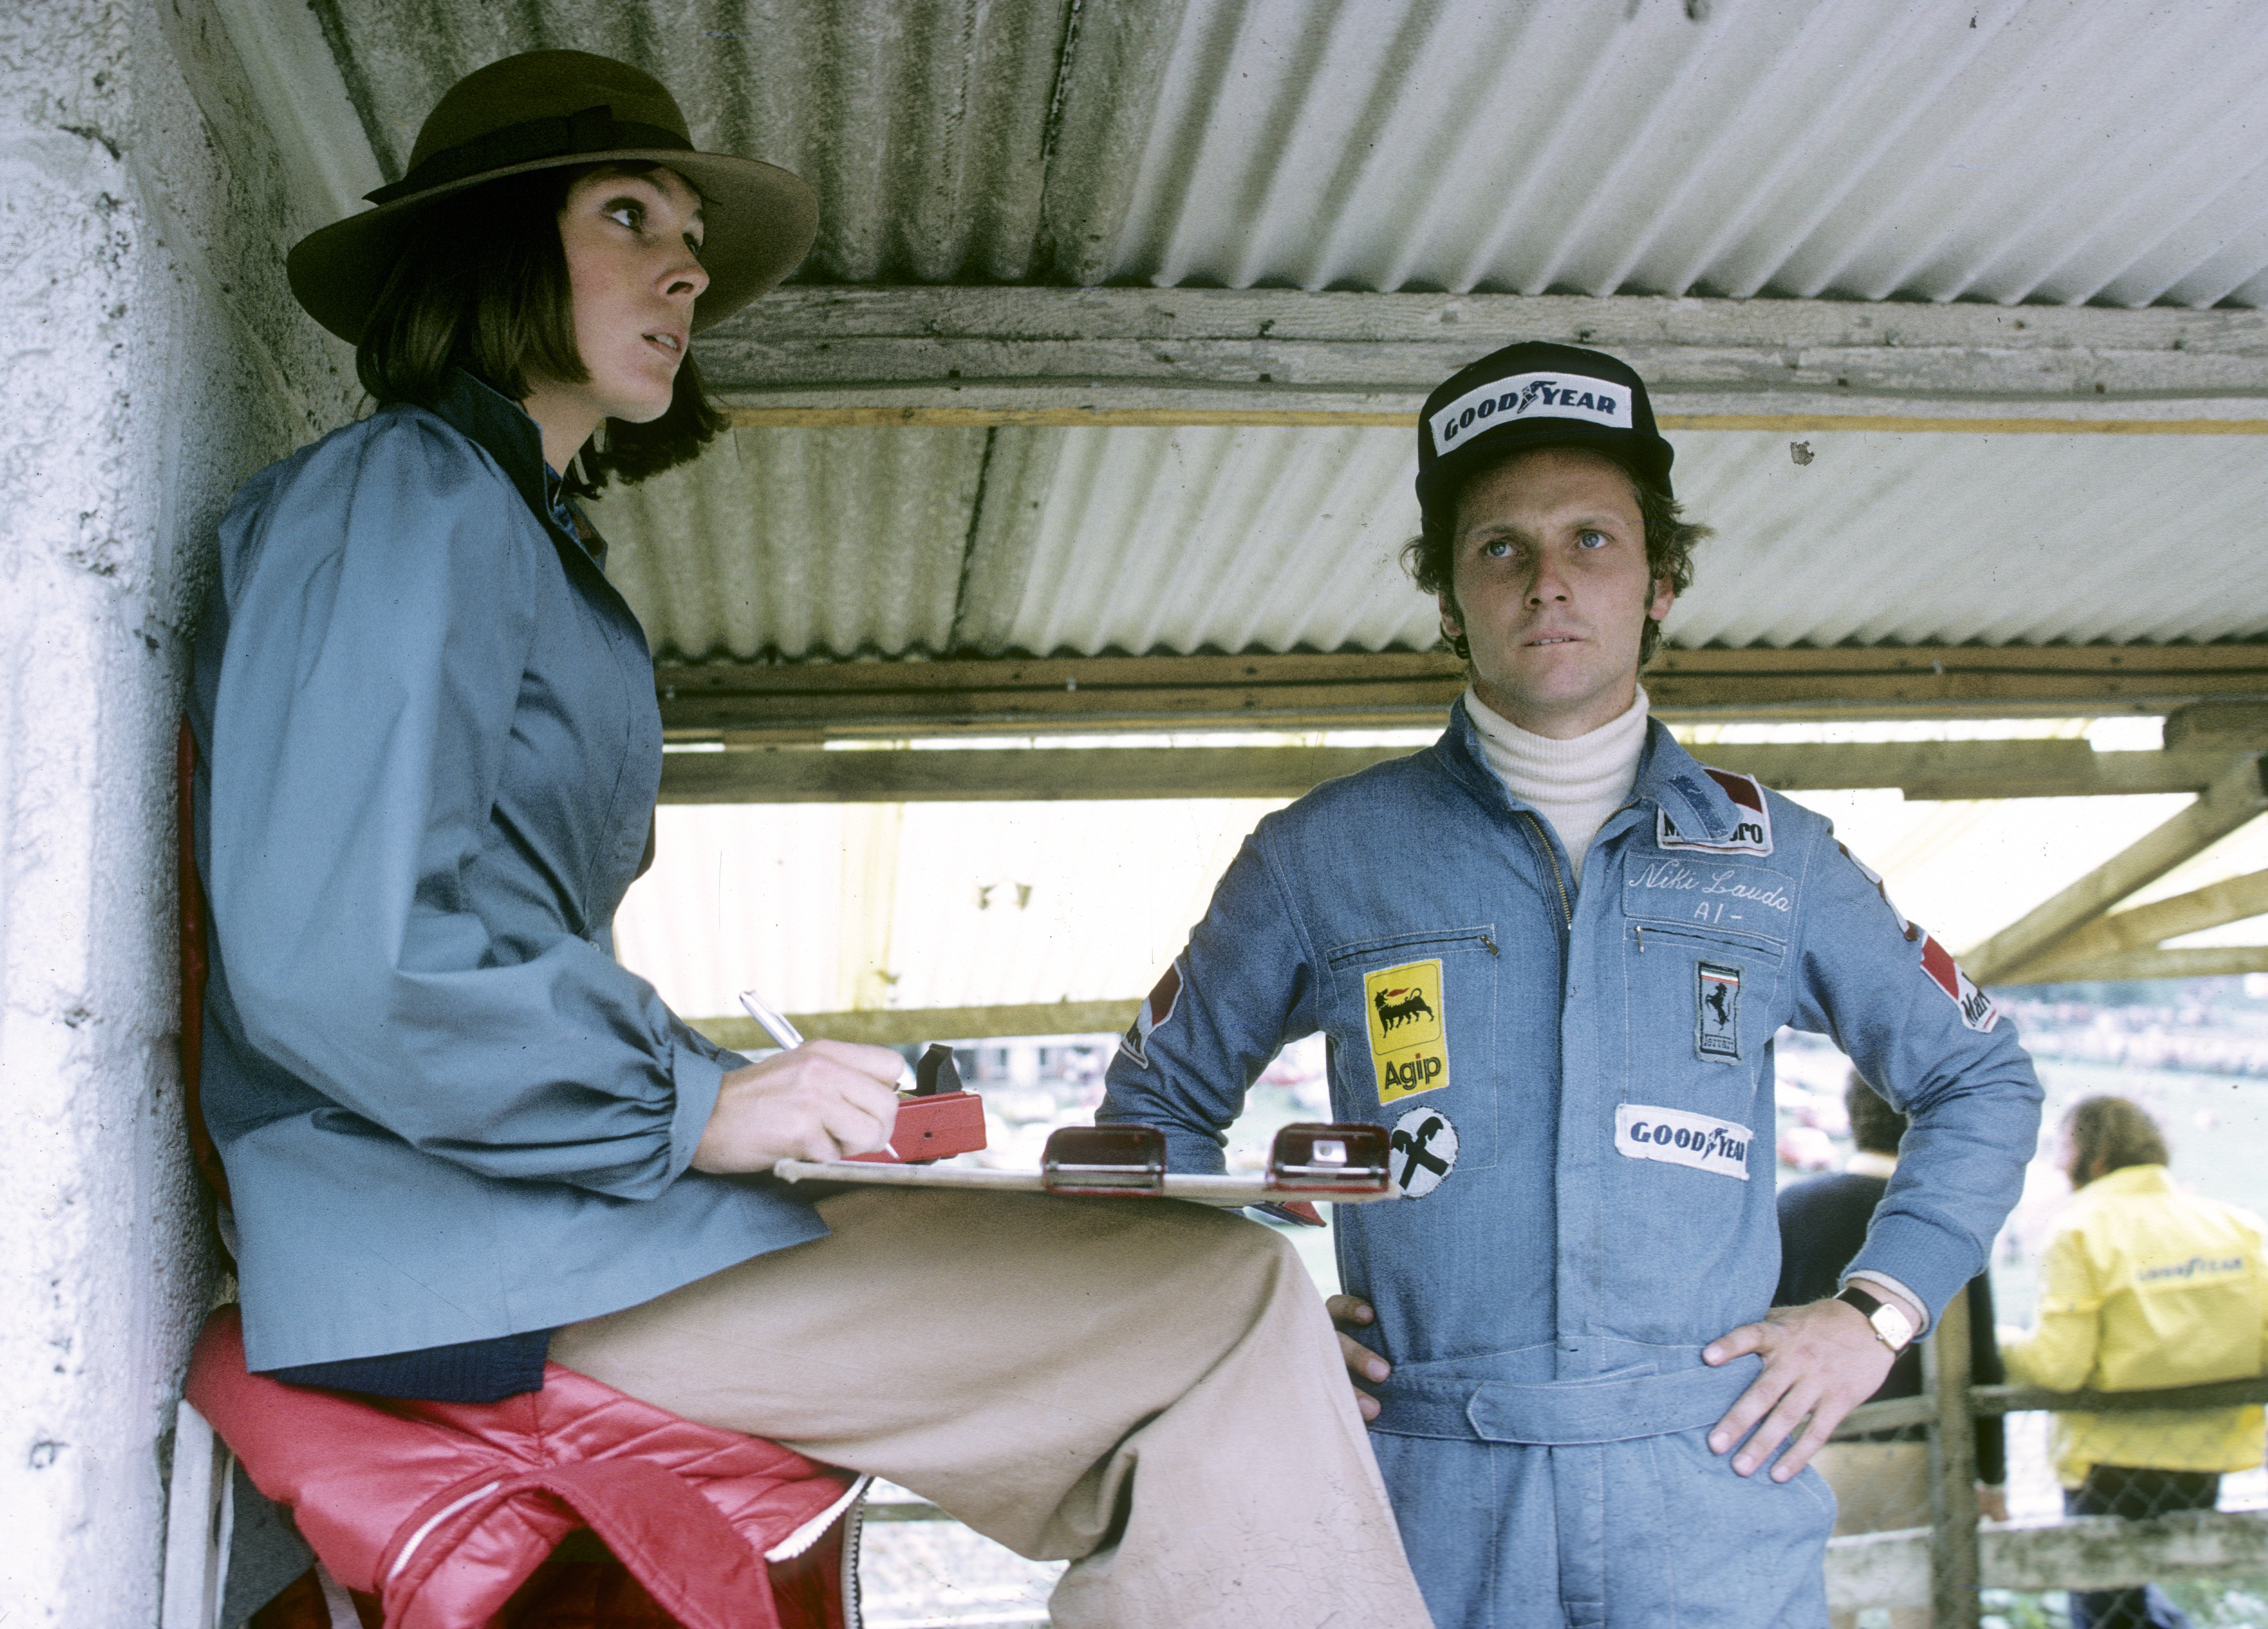 Marlene Knaus and Niki Lauda on July 1, 1974, in Brands Hatch, England. | Source: Getty Images